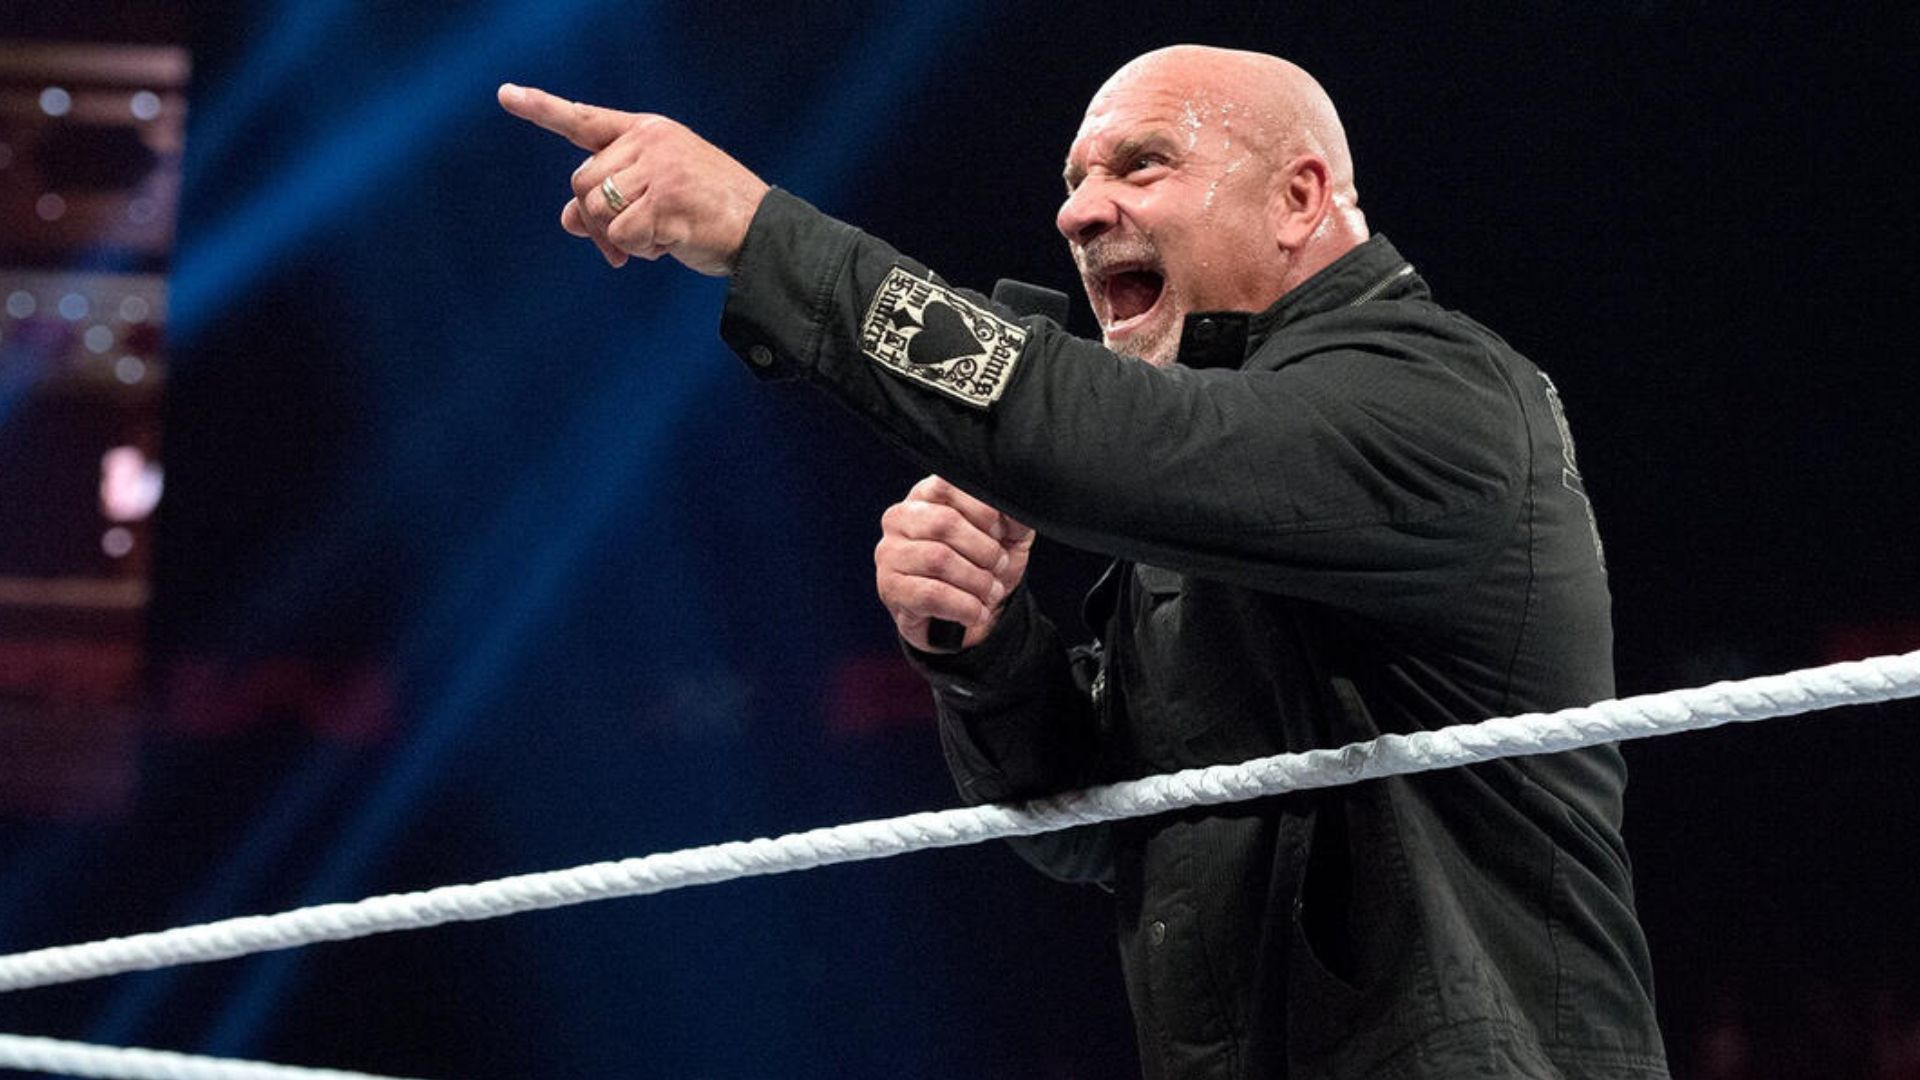 The veteran was inducted into the Hall of Fame in 2018. [Photo: WWE.com]